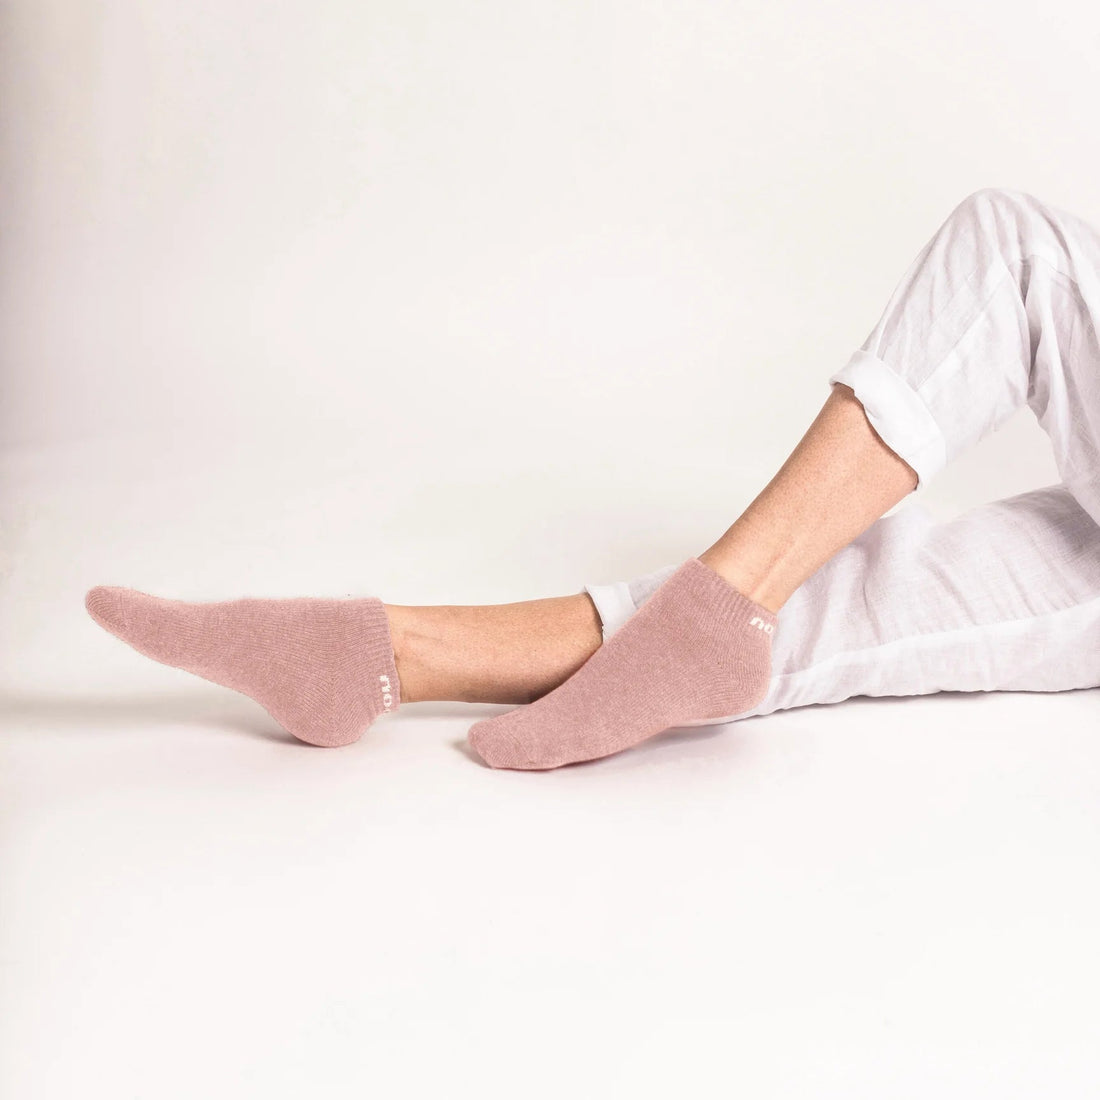 Nooan Socks - Napier, Pink Marshmallow - The Flower Crate